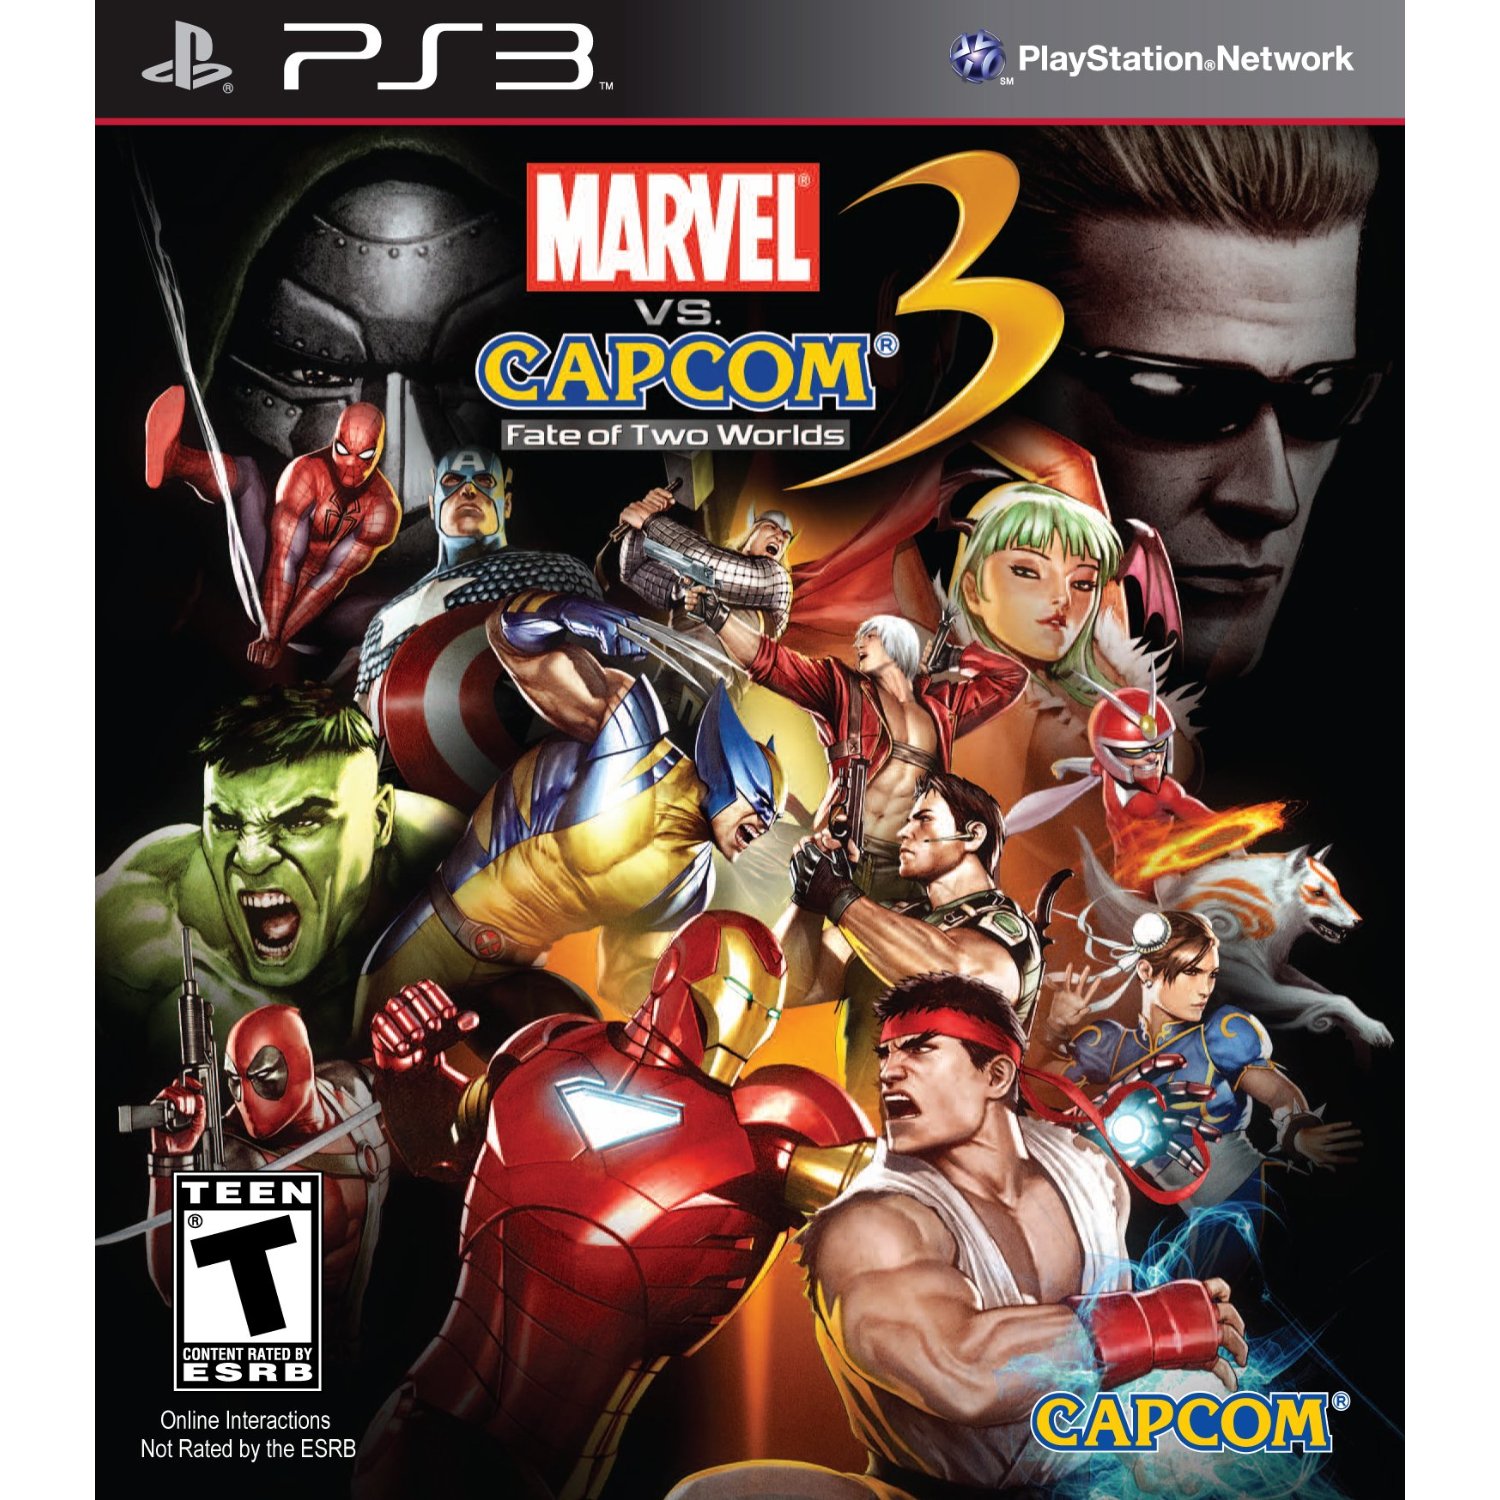 PS3: MARVEL VS CAPCOM 3 - FATE OF TWO WORLDS (BOX)